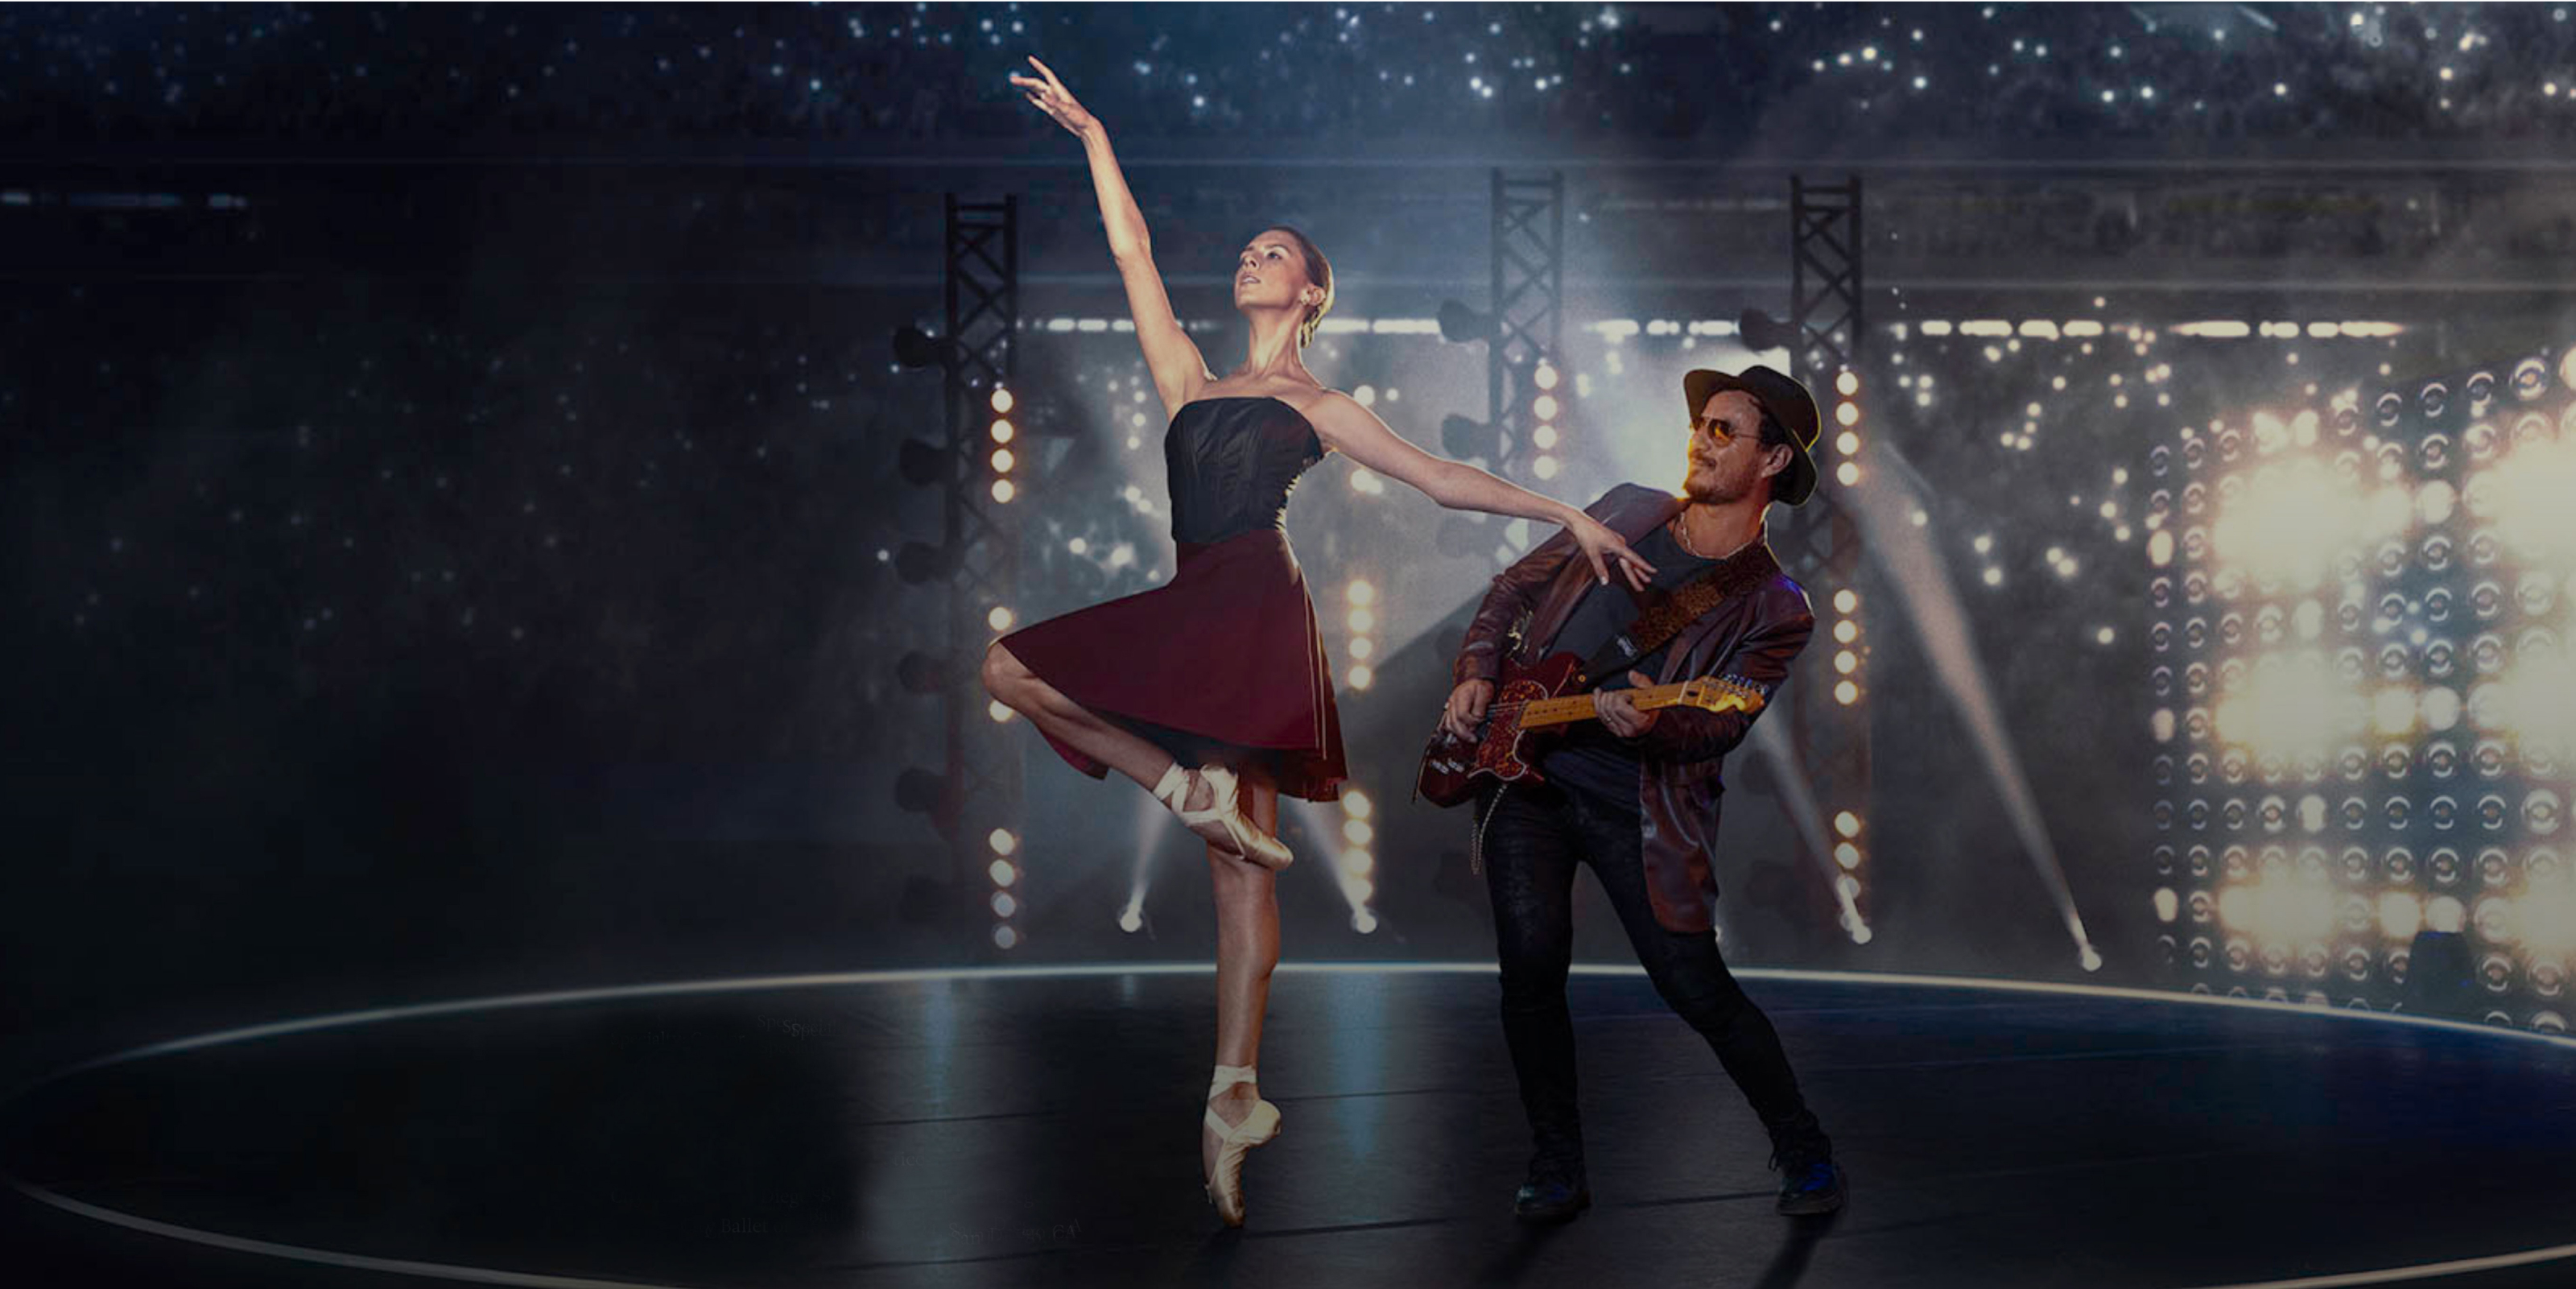 Chiara dances ballet in a deep burgundy skirted ballet dress with black bodice, next to a man playing an electric guitar. All around them, lights sparkle.